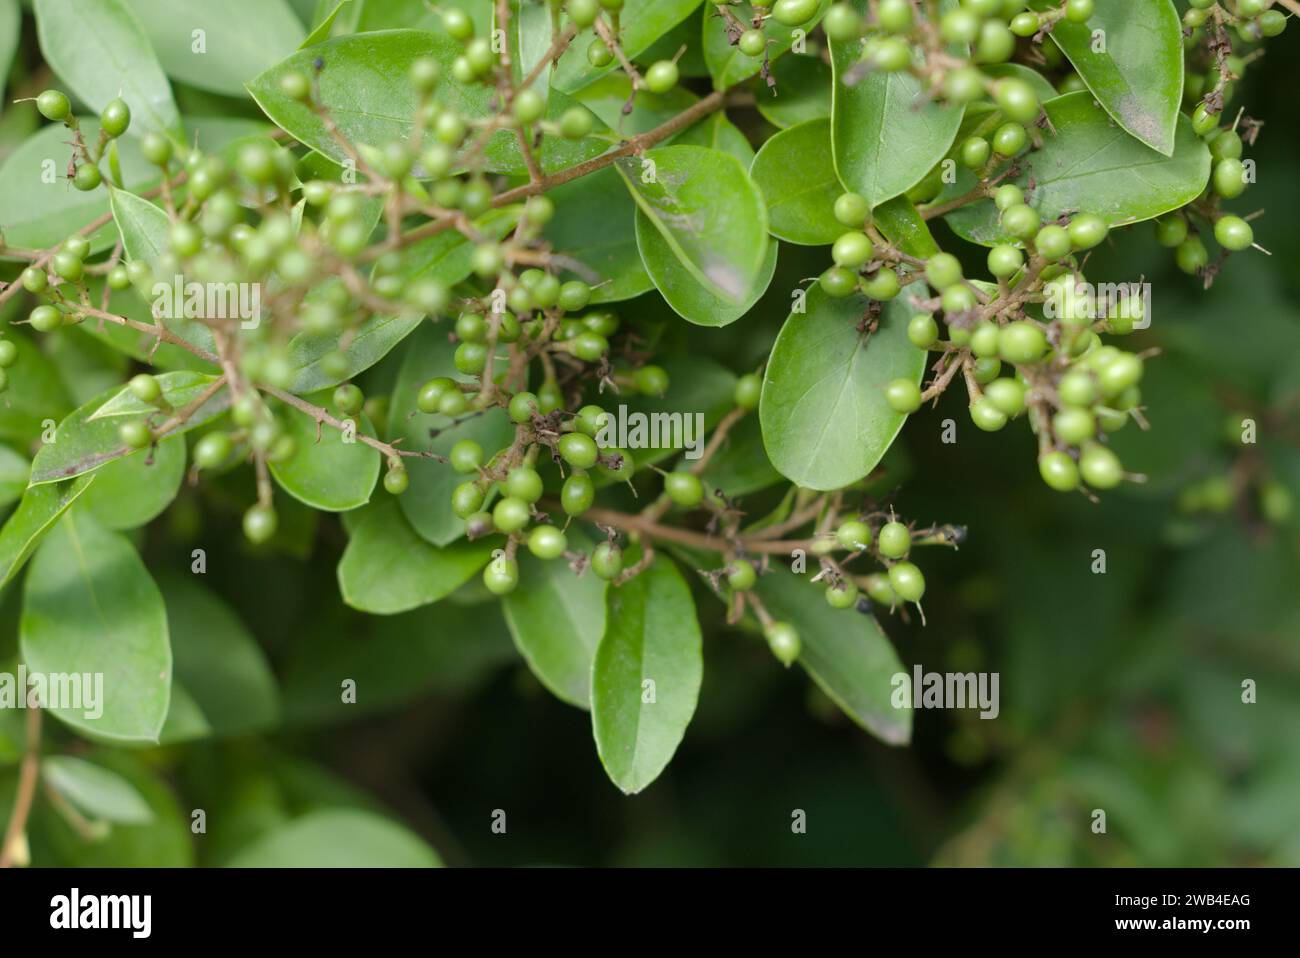 Ligustrum sinense or Chinese privet. This is an evergreen ornamental plant with poisonous berries. The plant grows in many places in Asia. Japan Stock Photo